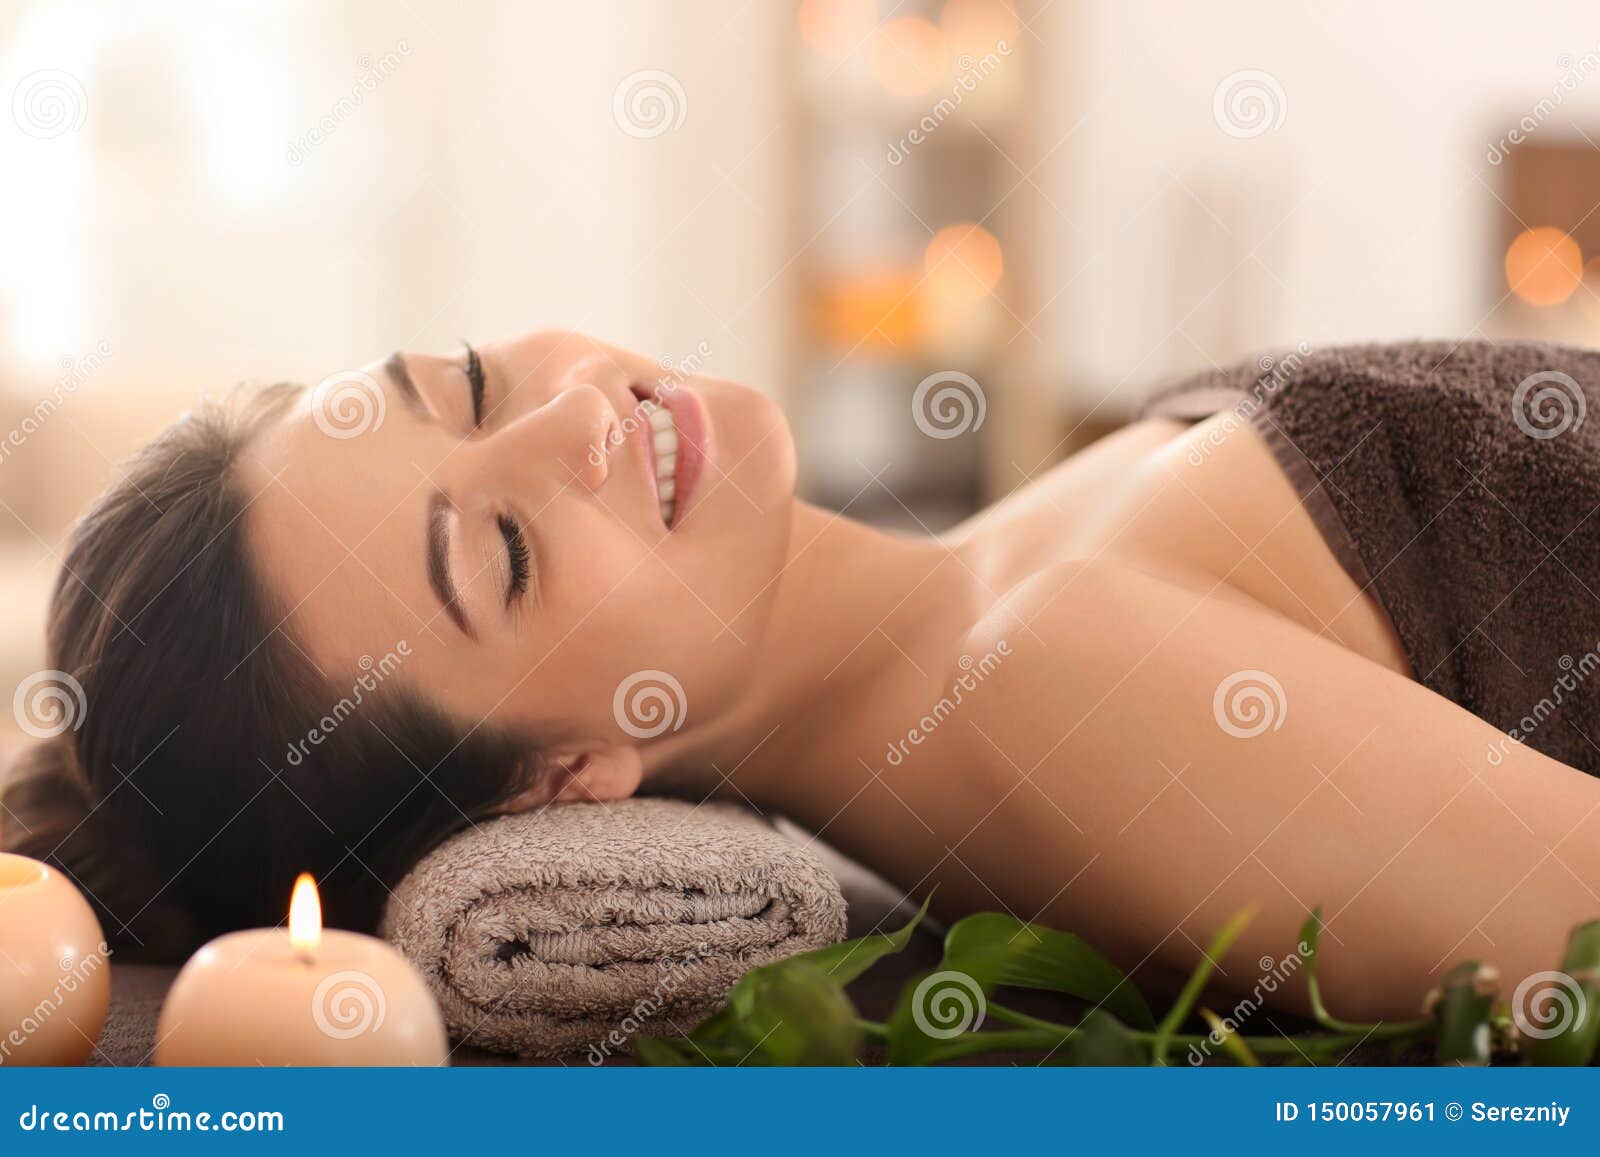 Young Woman Relaxing On Massage Table At Spa Salon Stock Image Image